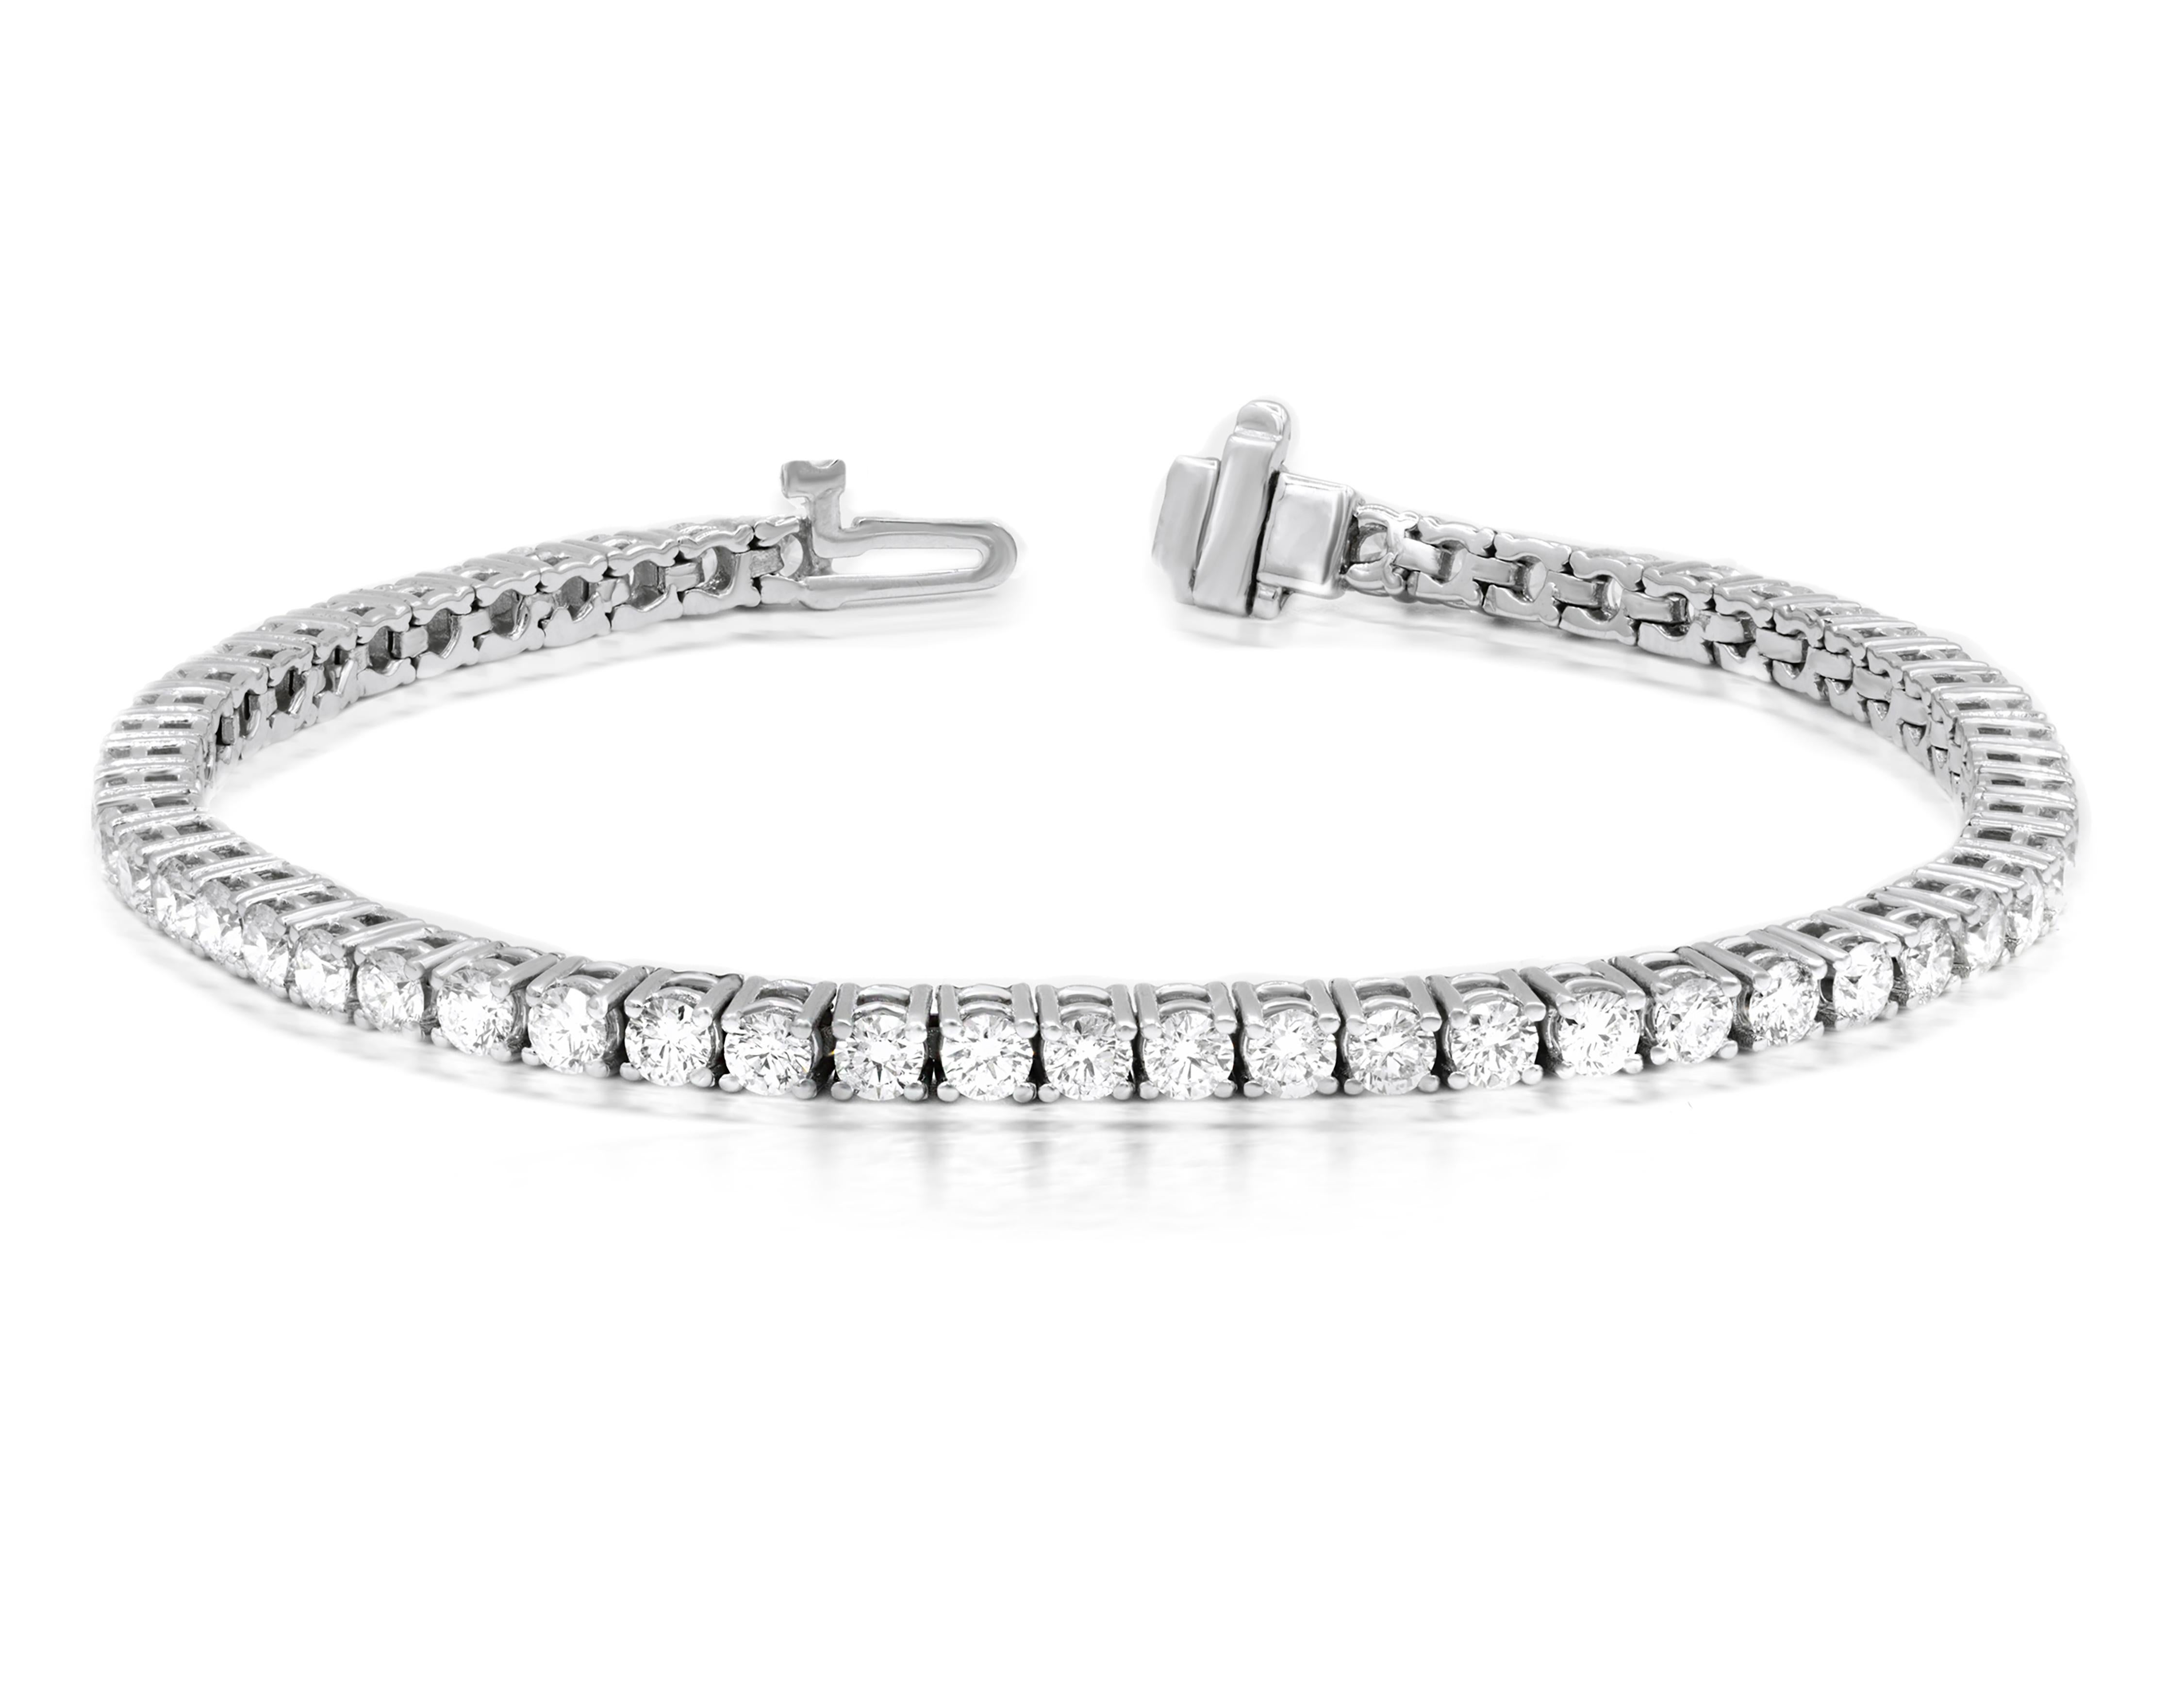 14kt white gold tennis bracelet featuring 3.00 cts tw of round diamonds set in a 4 prong setting GH SI
Diana M. is a leading supplier of top-quality fine jewelry for over 35 years.
Diana M is one-stop shop for all your jewelry shopping, carrying